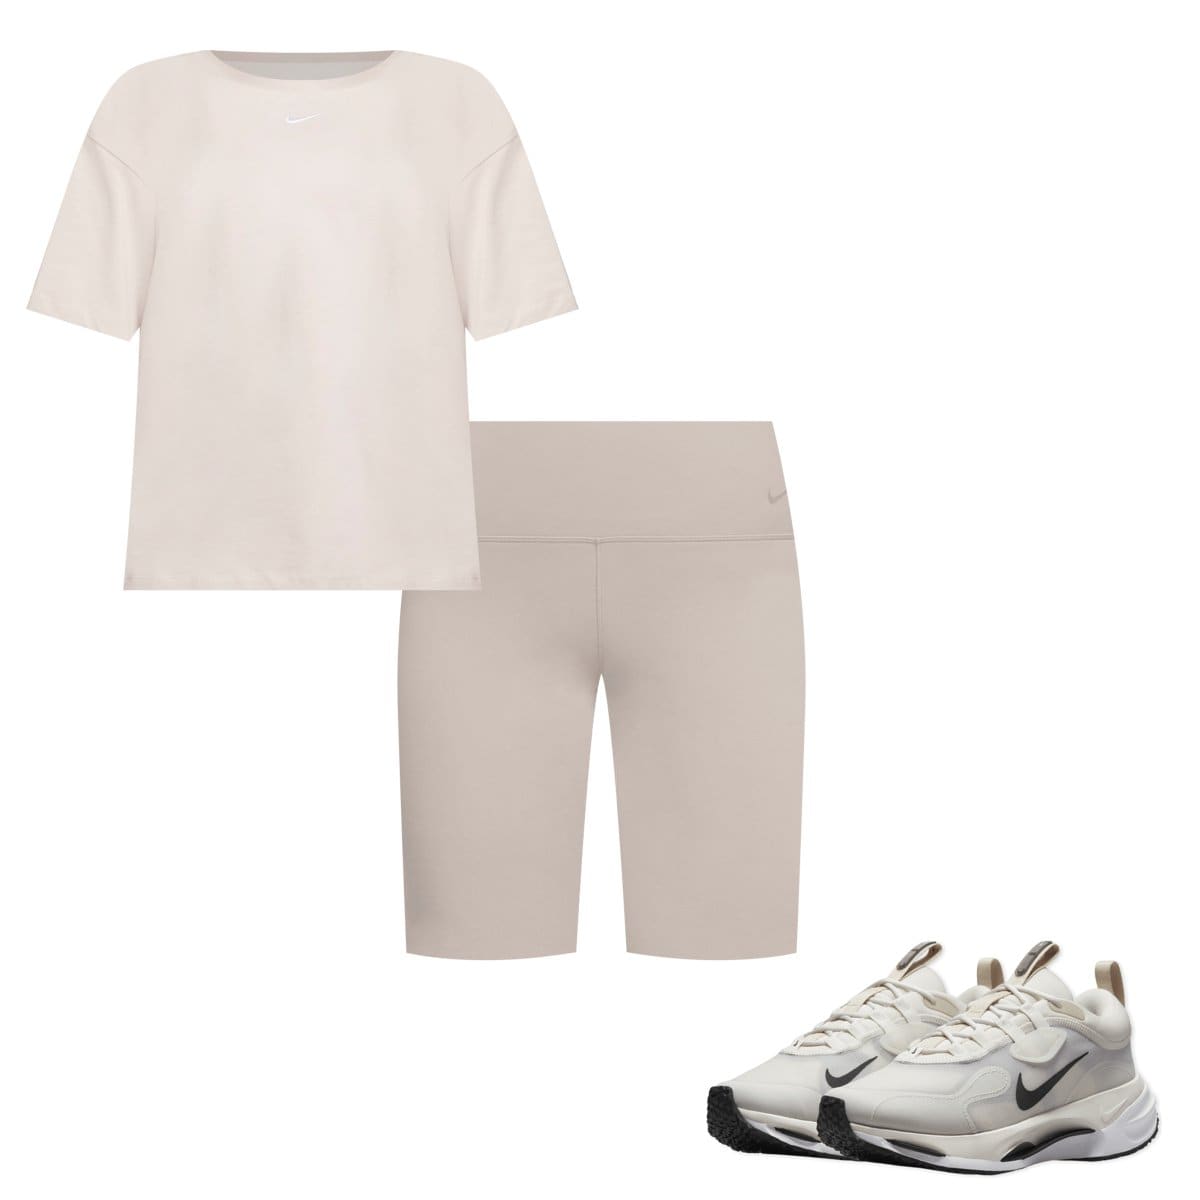 𝙽𝚒𝙺𝙴✔︎𝚂𝙷𝙾𝙴𝚂  Tennis shoe outfits summer, Tennis shoes outfit,  Outfit shoes